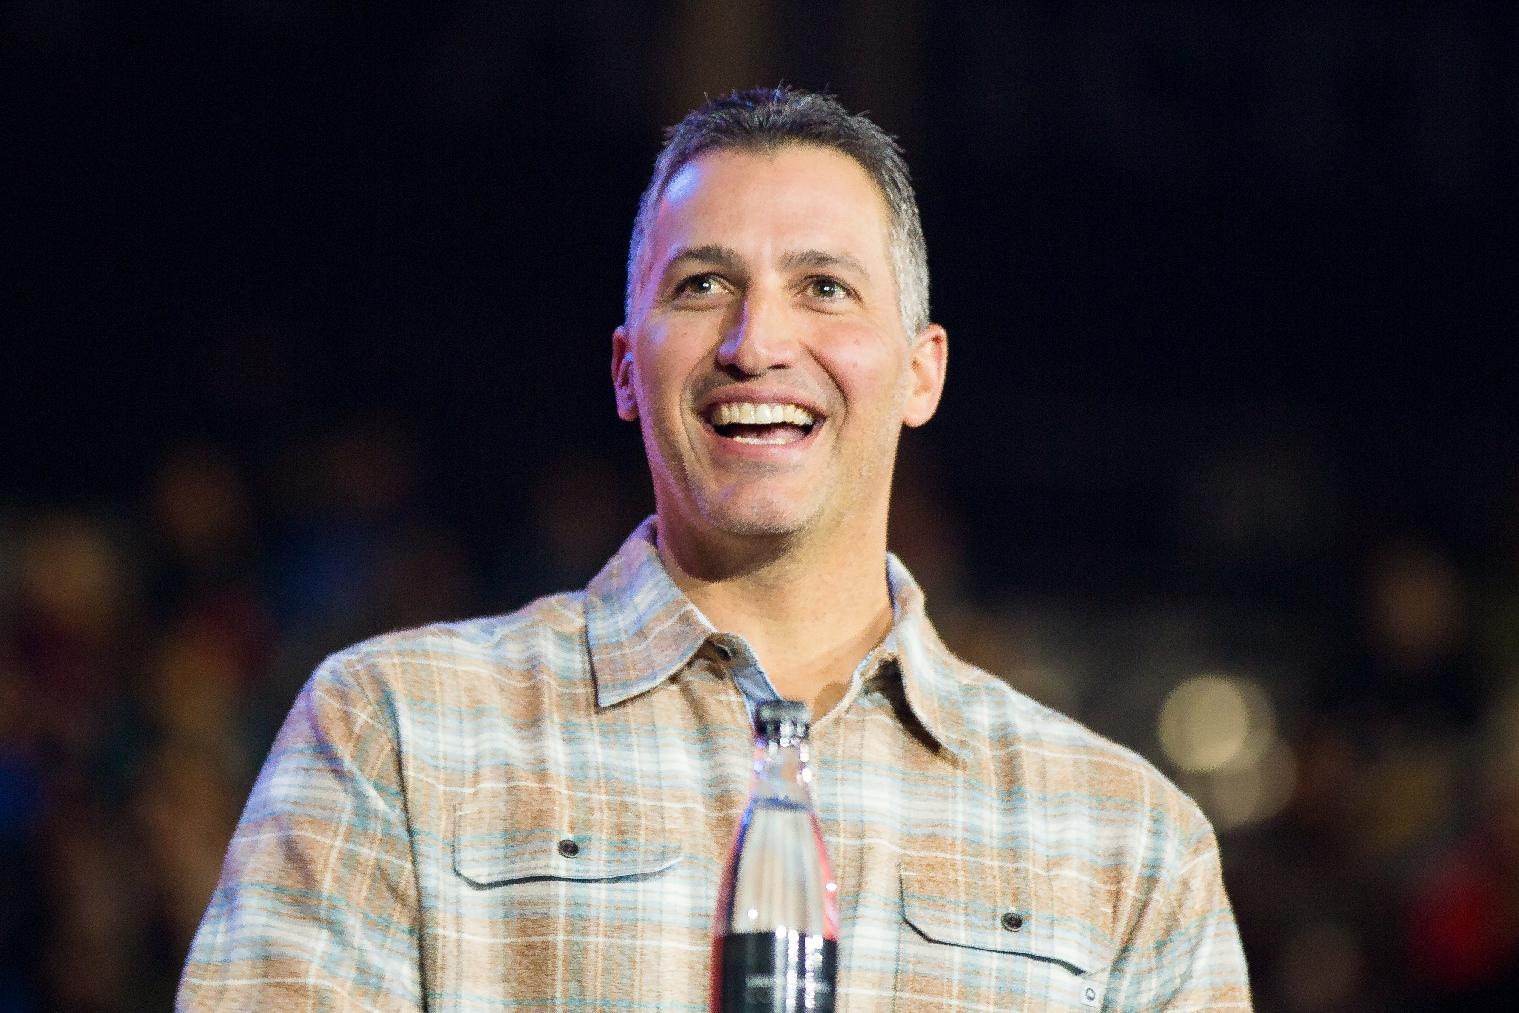 Former Yankees pitcher Andy Pettitte talks faith and baseball in